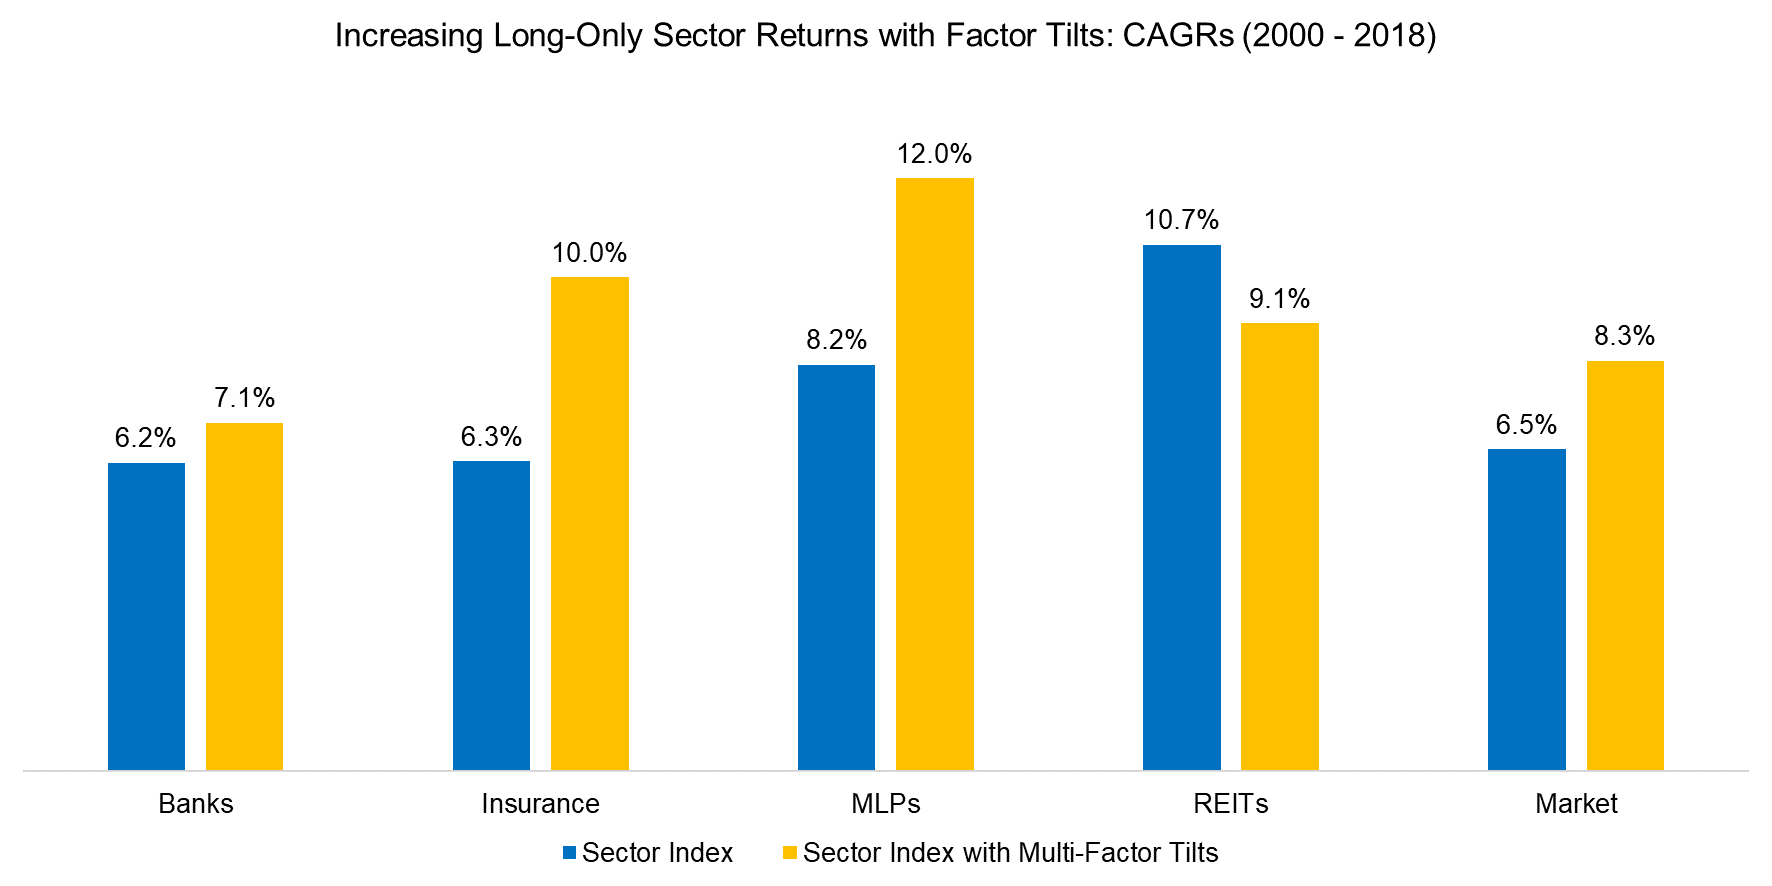 Increasing Long-Only Sector Returns with Factor Tilts (2000 - 2018)